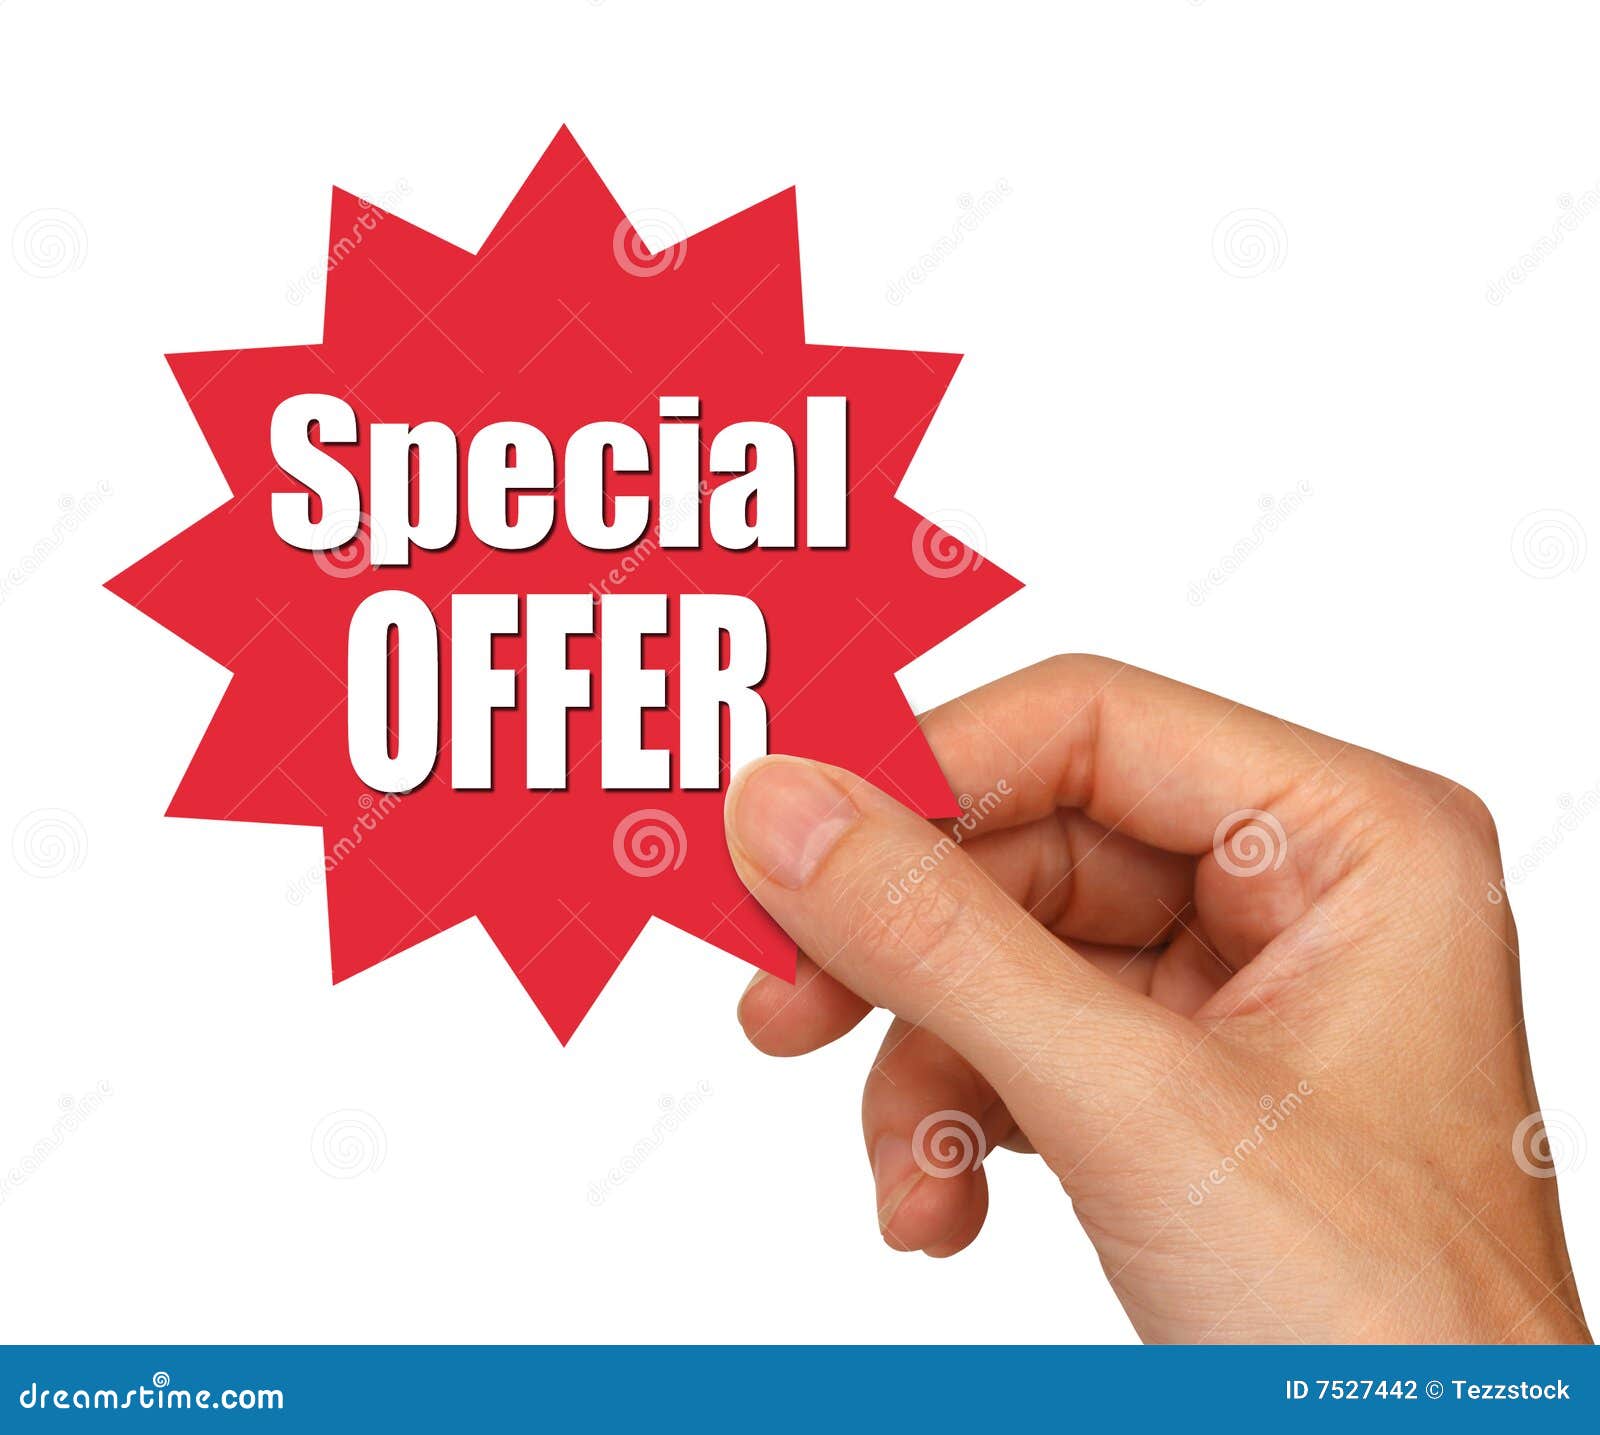 special offer star